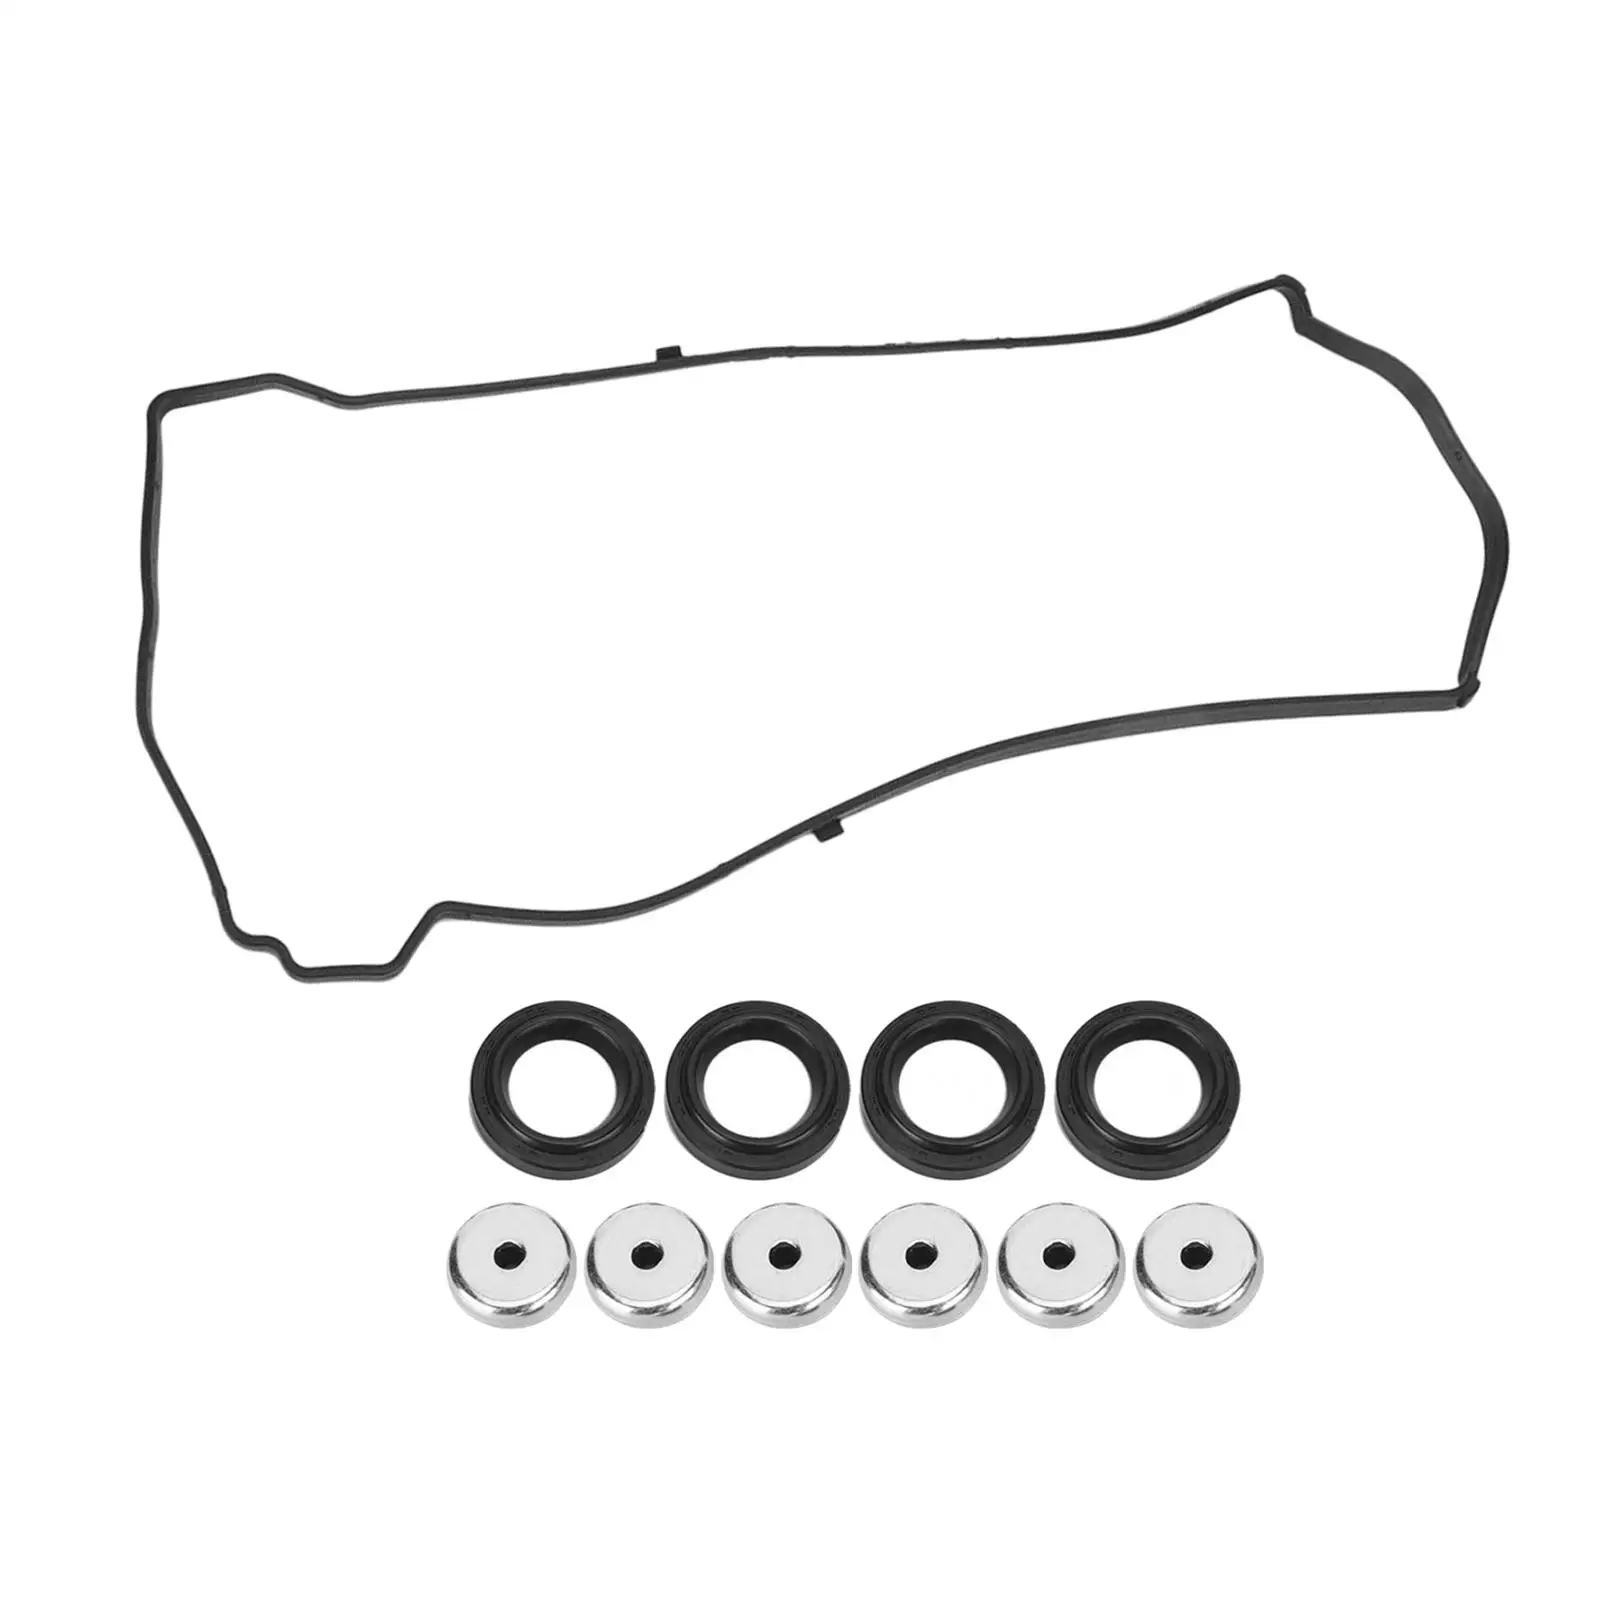 Valve Cover Gasket Seal 12030-pnc-000 Durable Replaces Easy Installation Auto Accessory for Honda Acura RSX Tsx K20 K24 CRV